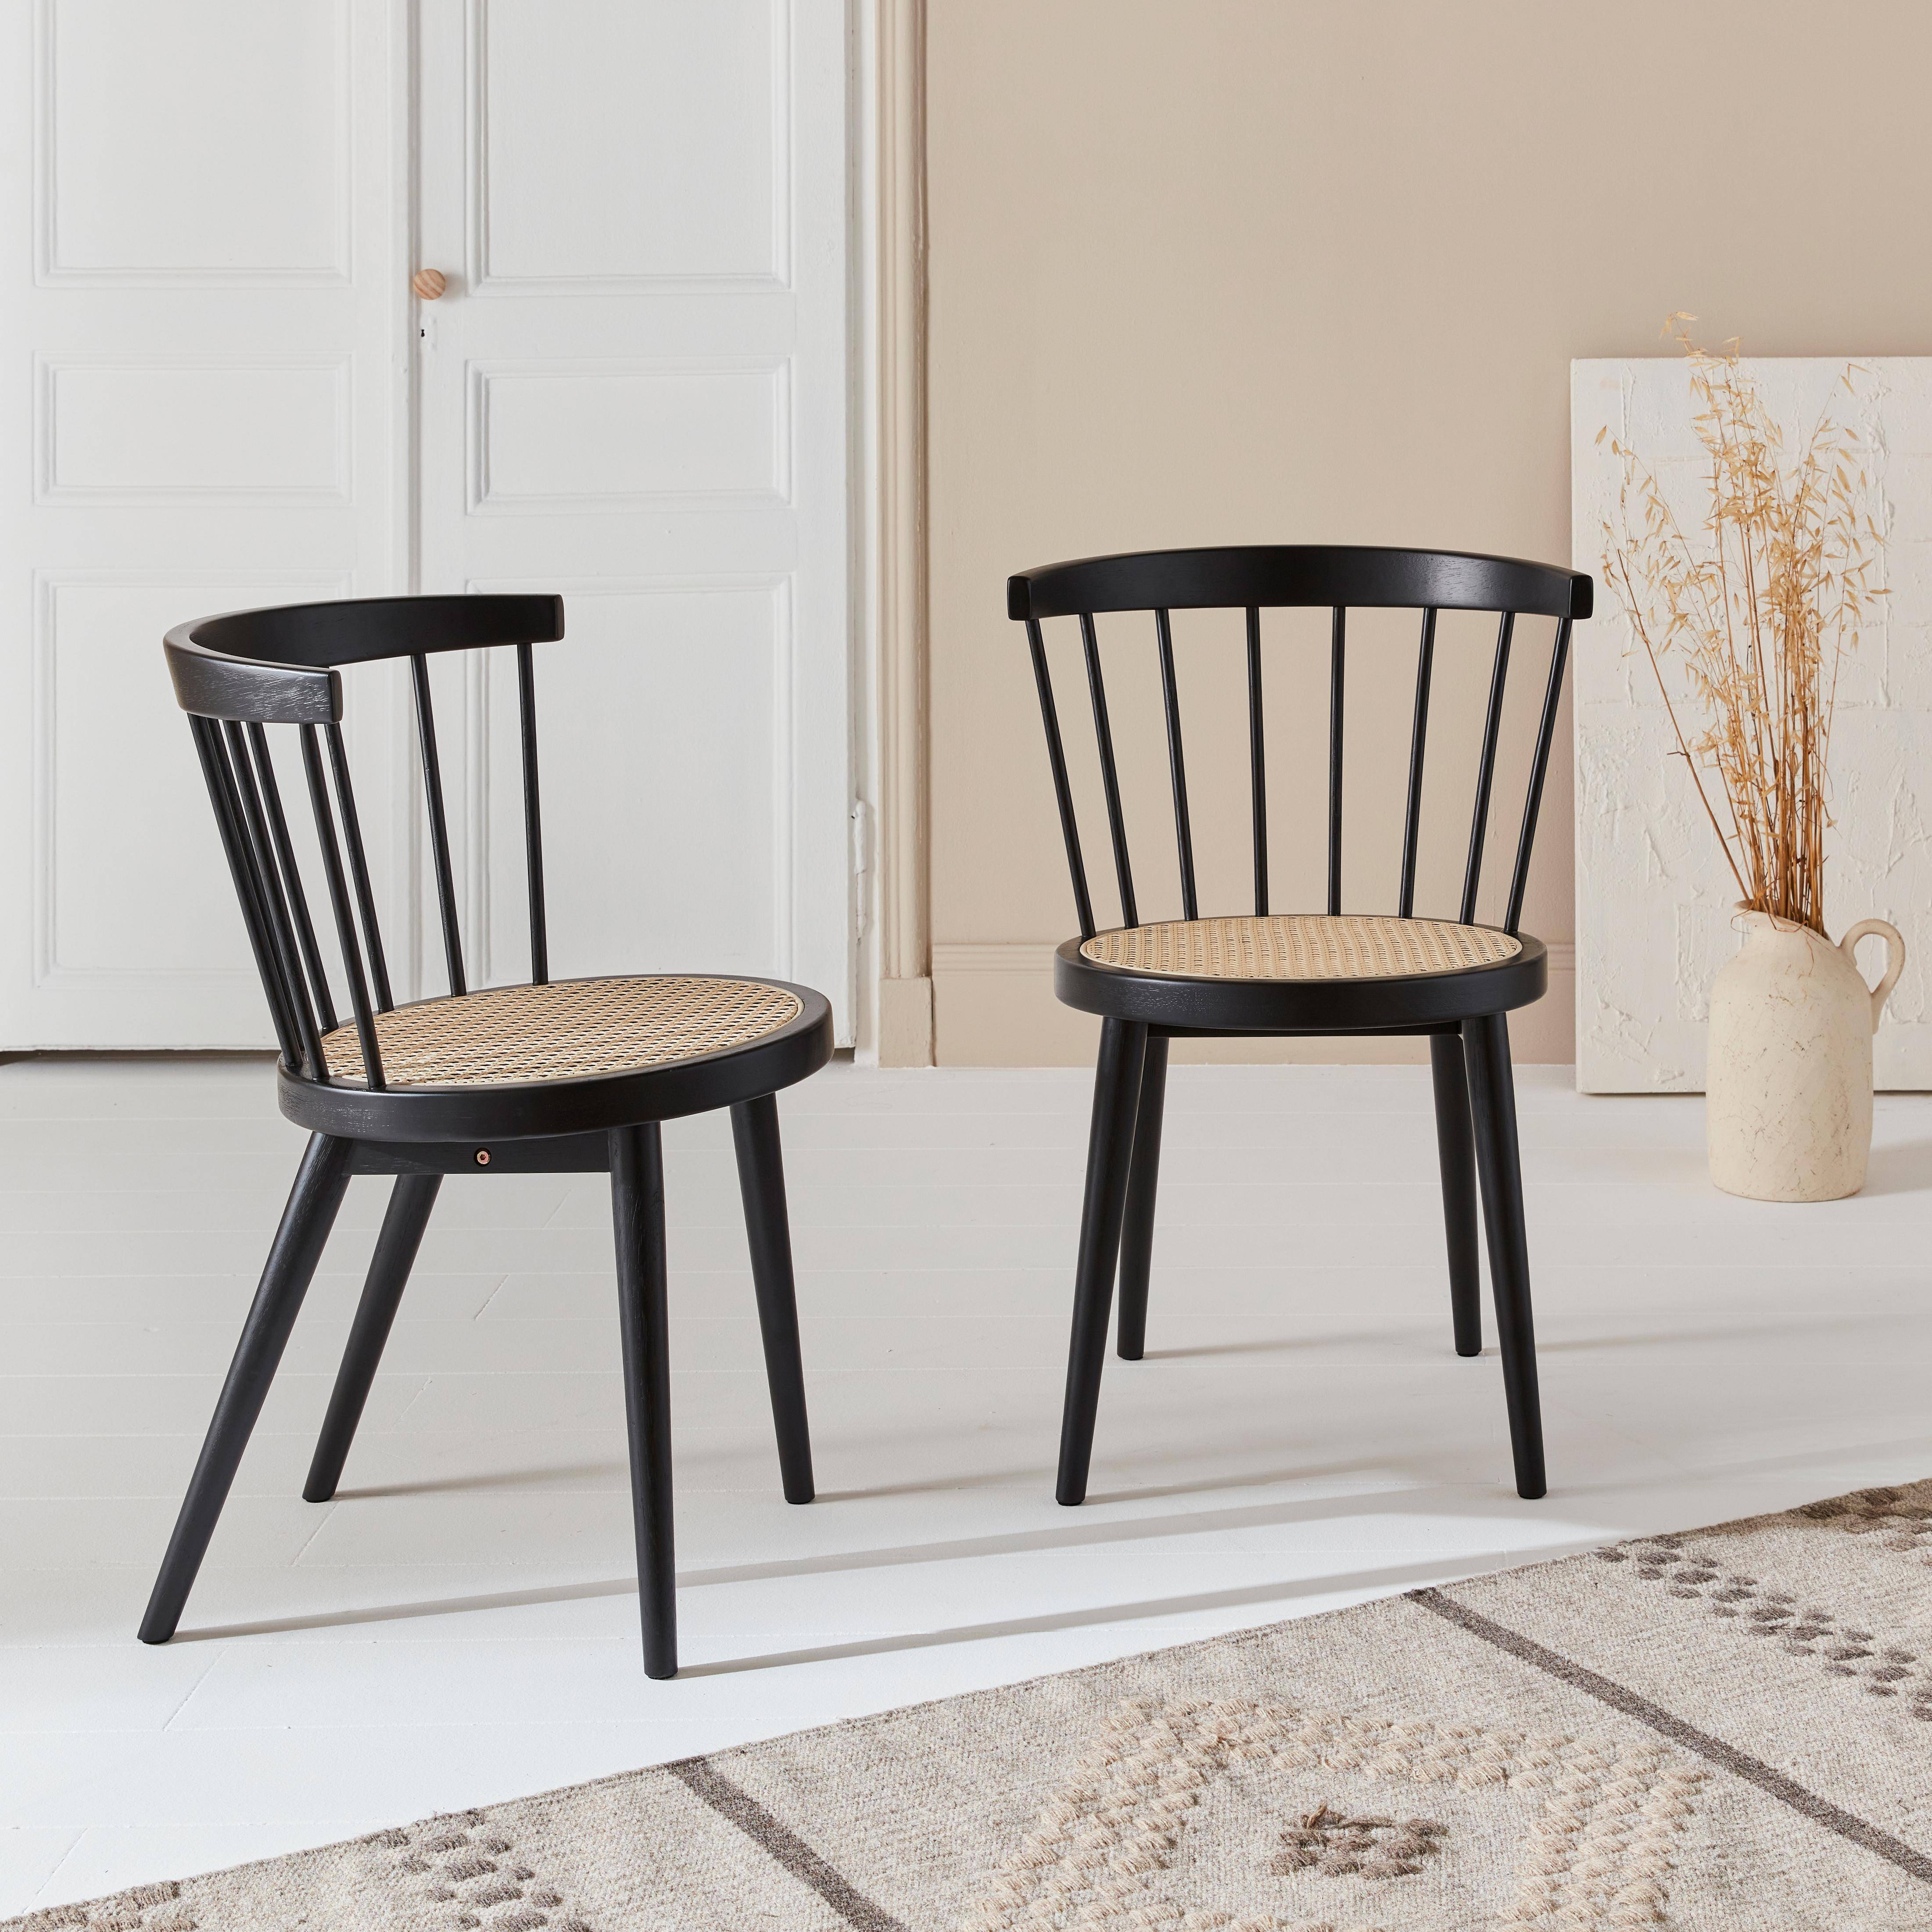 Pair of wood and cane dining chairs, W53 x D53.5 x H76cm, black Photo2